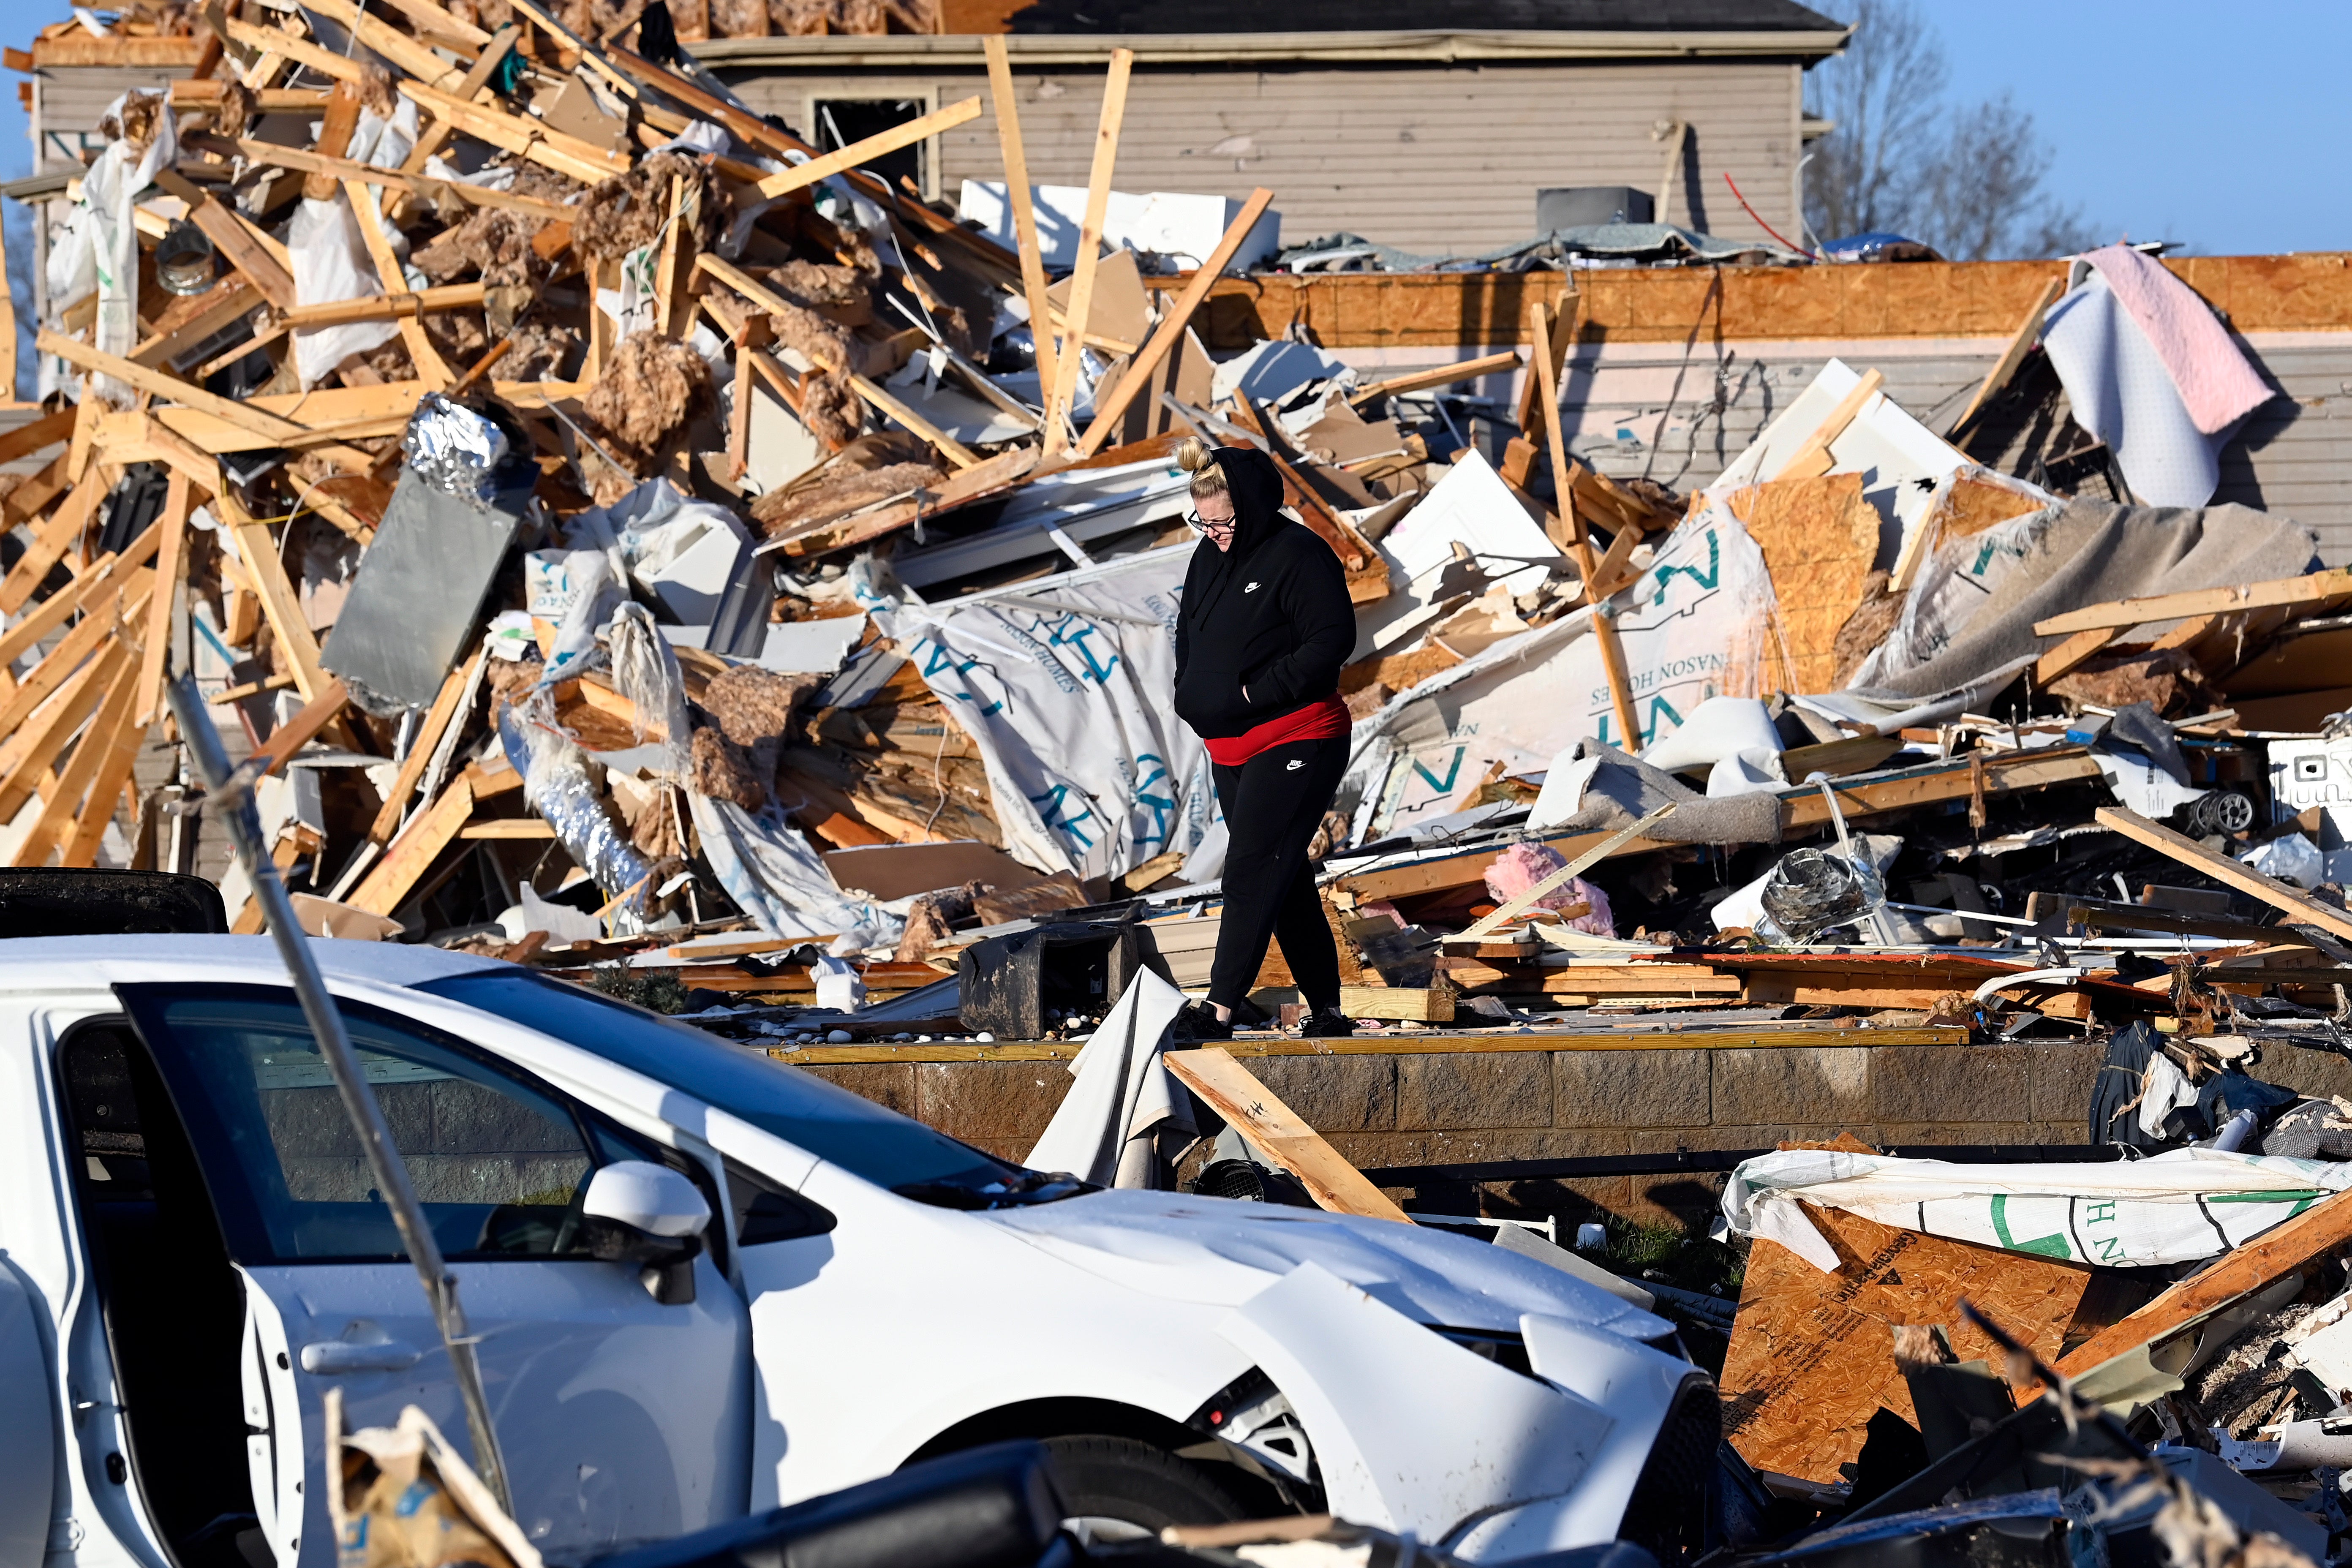 A resident examines the debris from a friend’s destroyed house in Clarksville, Tennessee